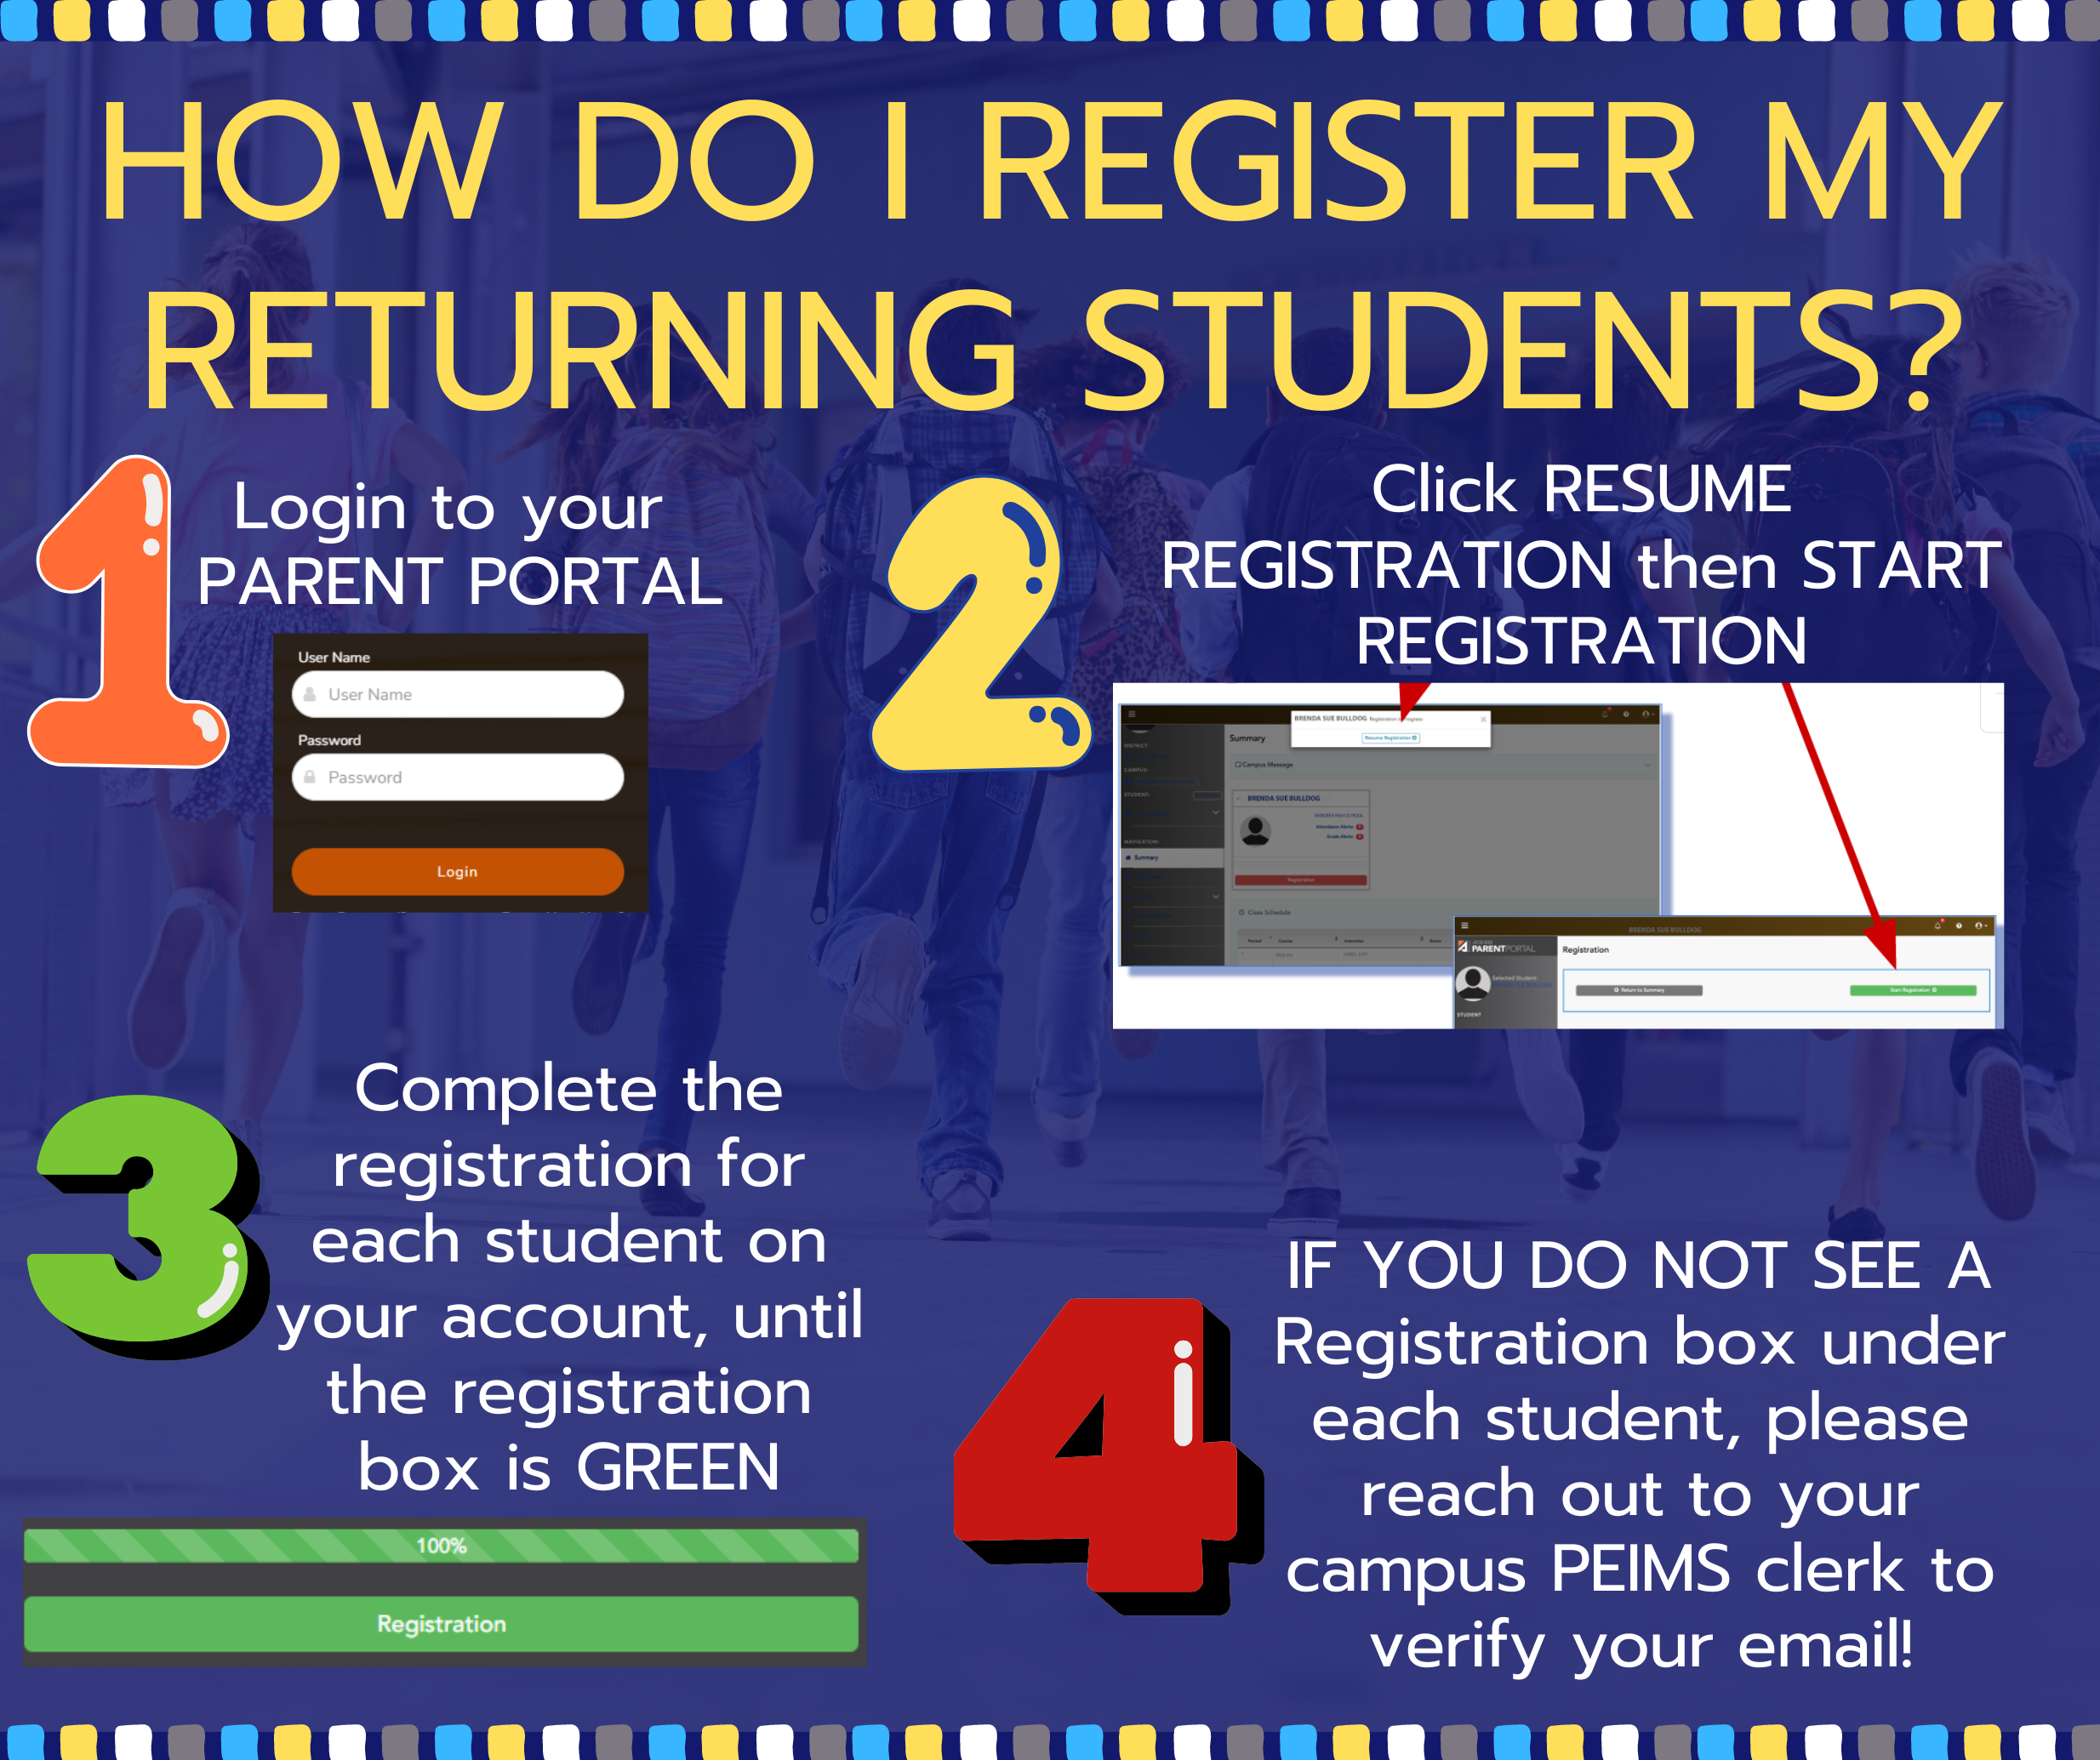 May be an image of text that says '2023-2024 RETURNING Student registration deadline is TODAY!!!! 6 Login to your parent portal today and complete the process! Need help? Call your campus PEIMS clerk AAлa'